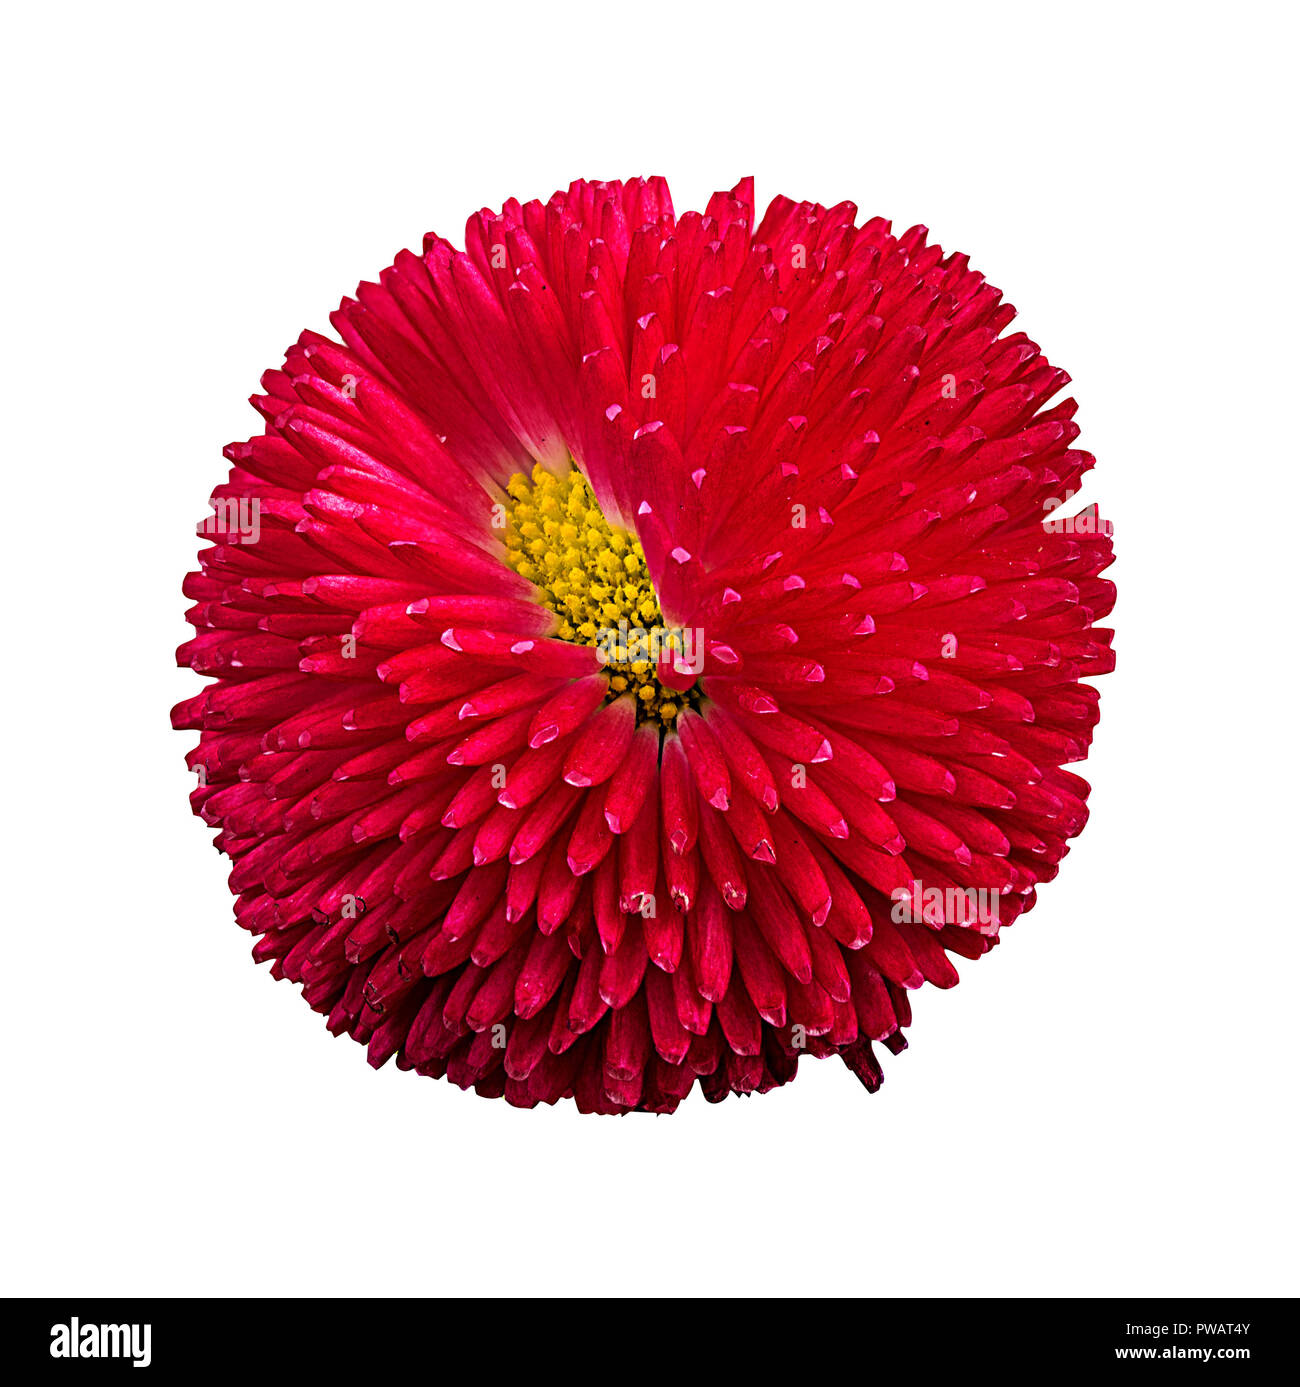 gerbera daisies isolated on white background Stock Photo